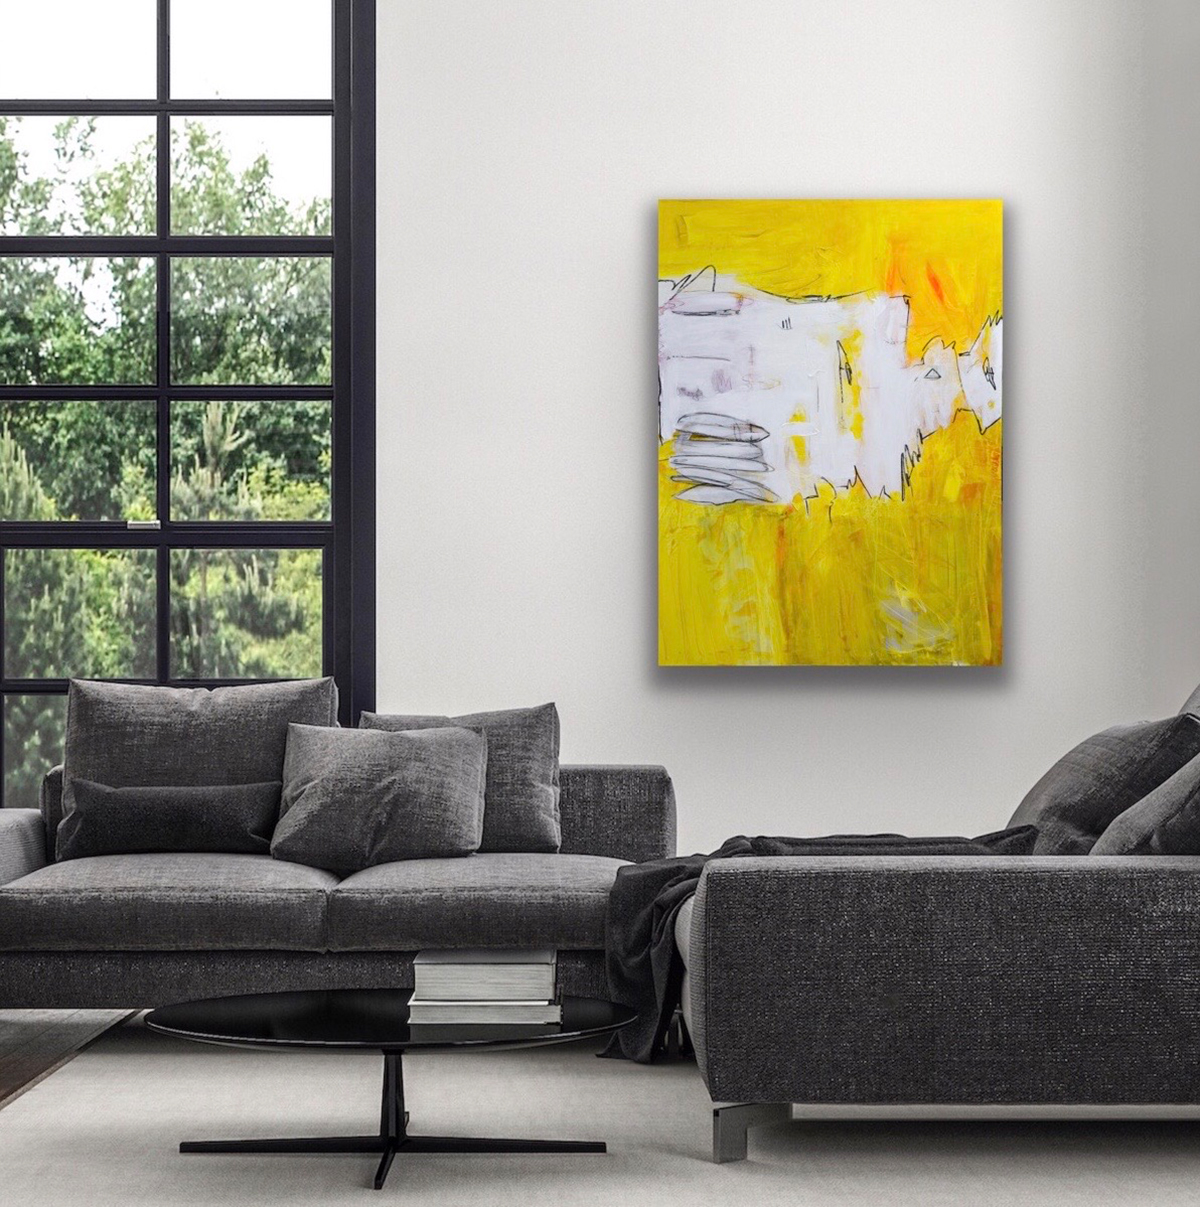 the golden area of love and light artwork painting canvas contemporary art kunst wohnen art interior yellow bright light